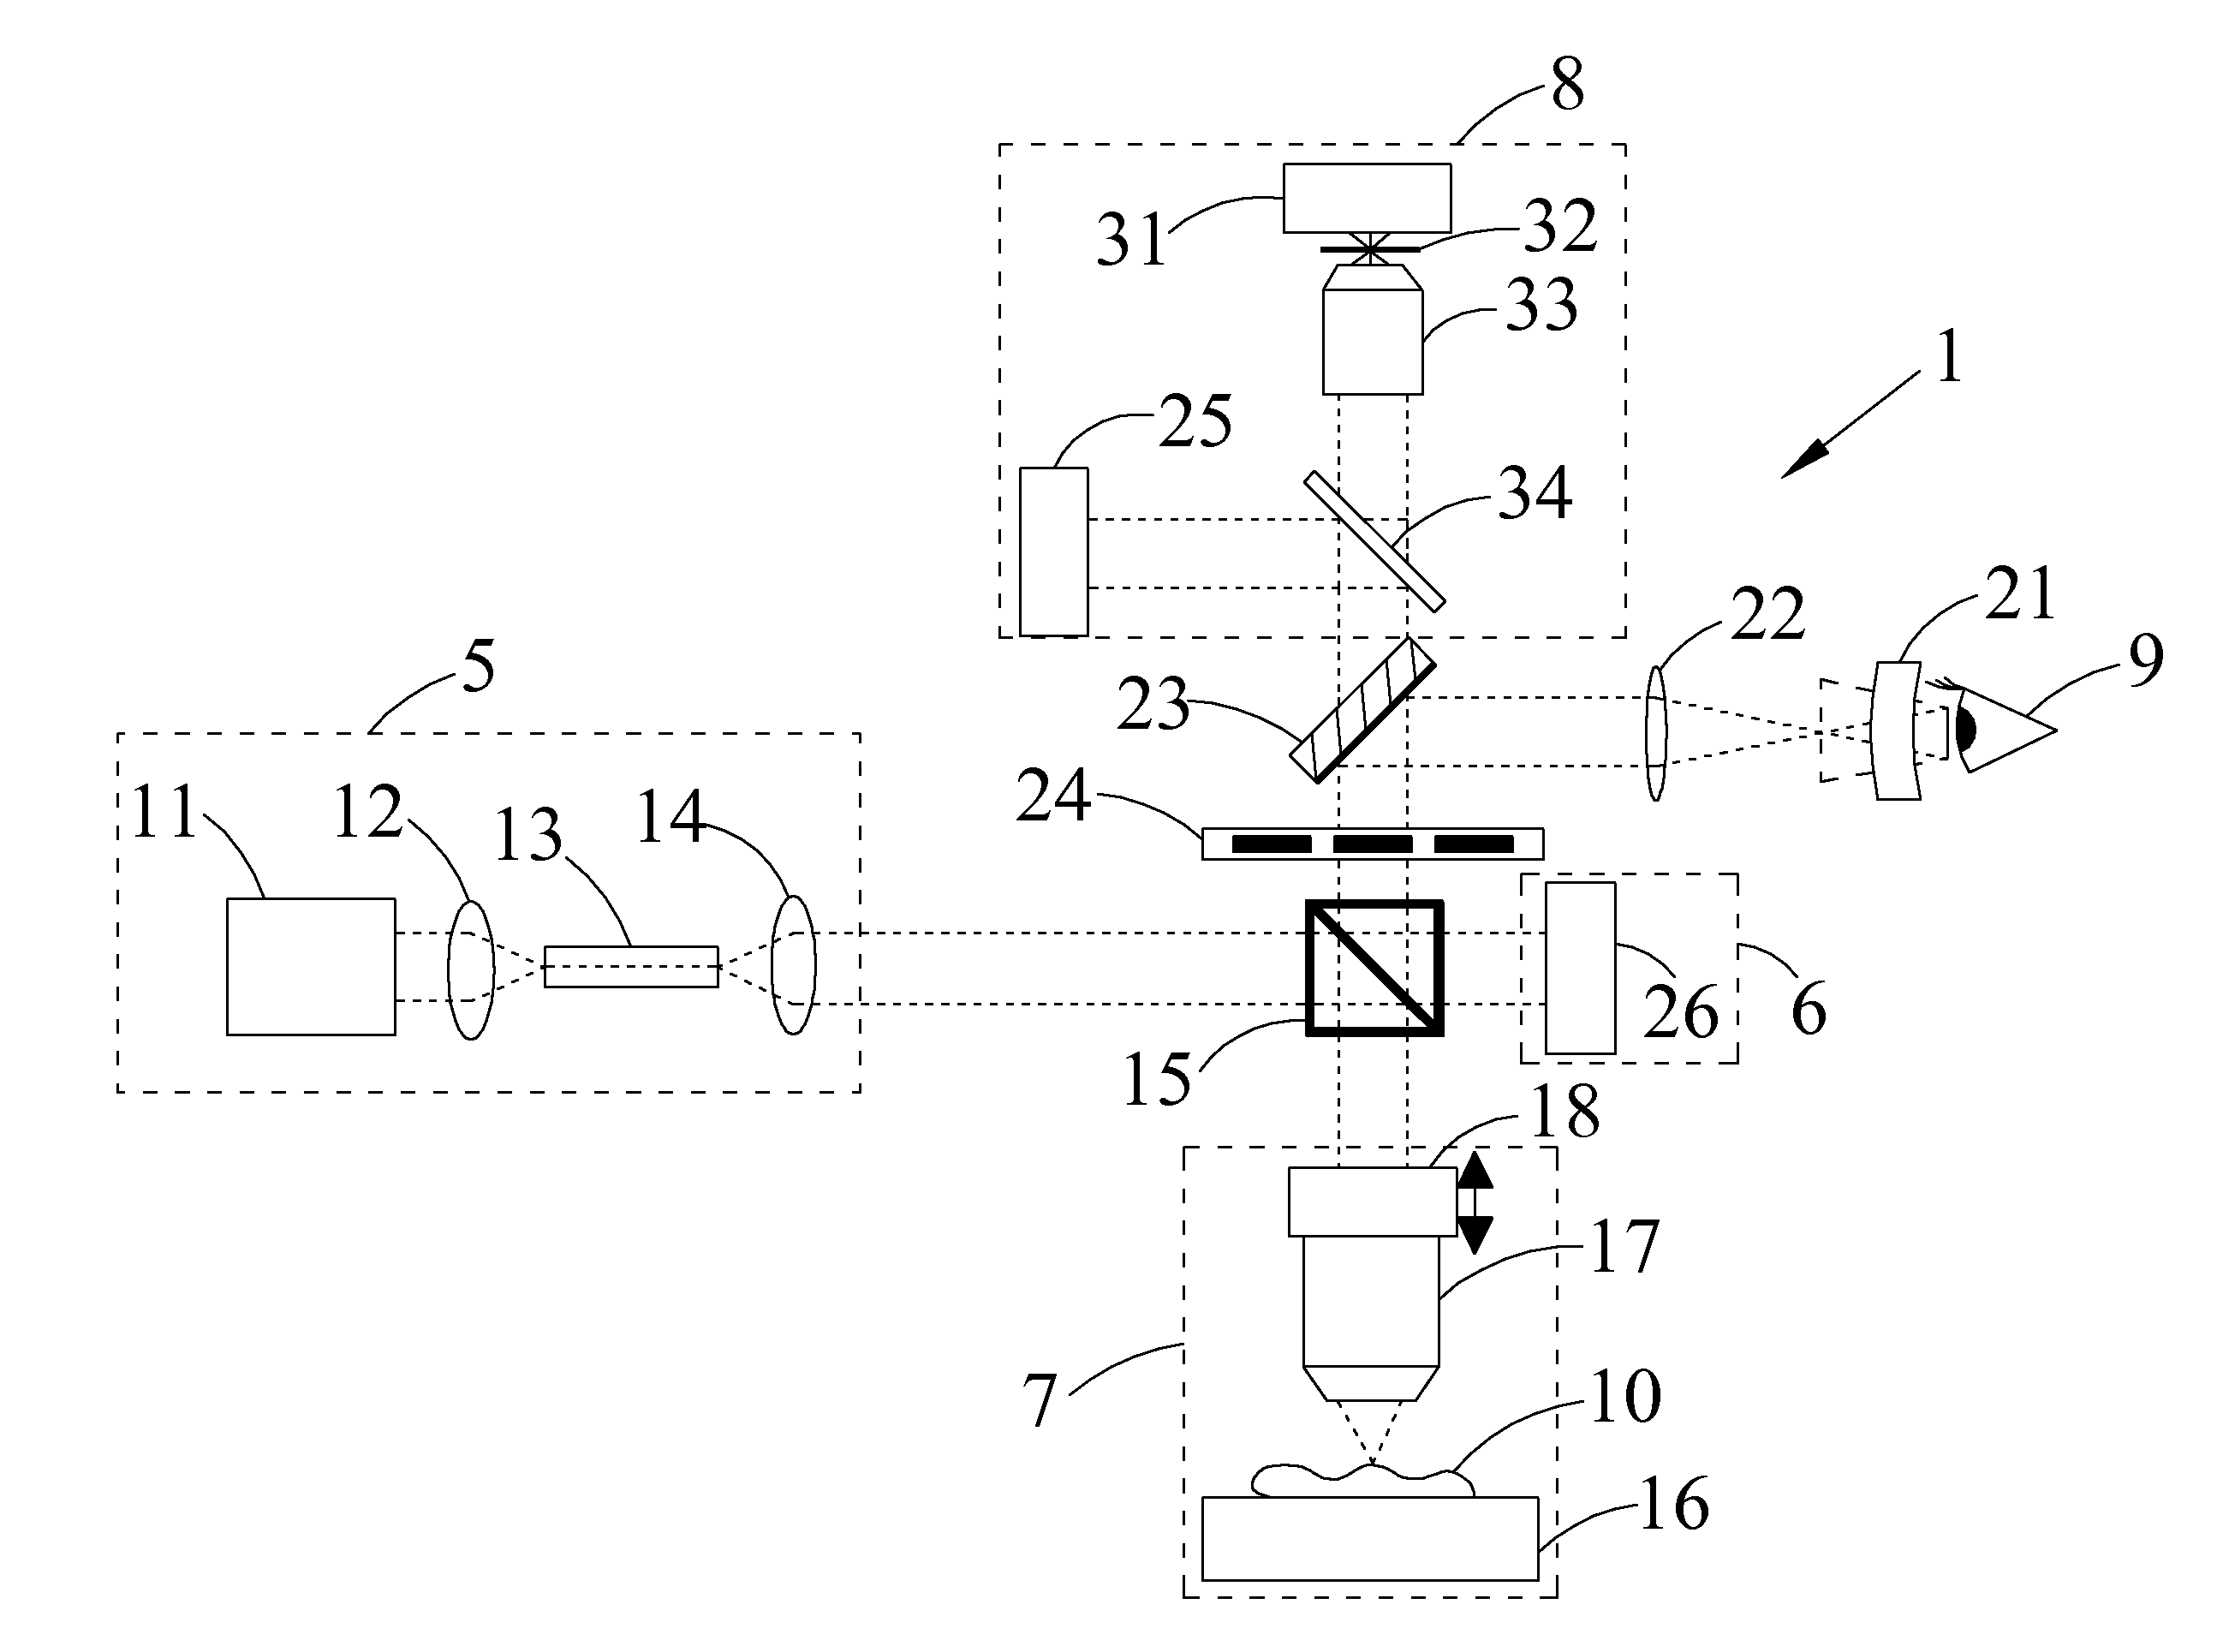 Three-dimensional optical coherence tomography confocal imaging apparatus